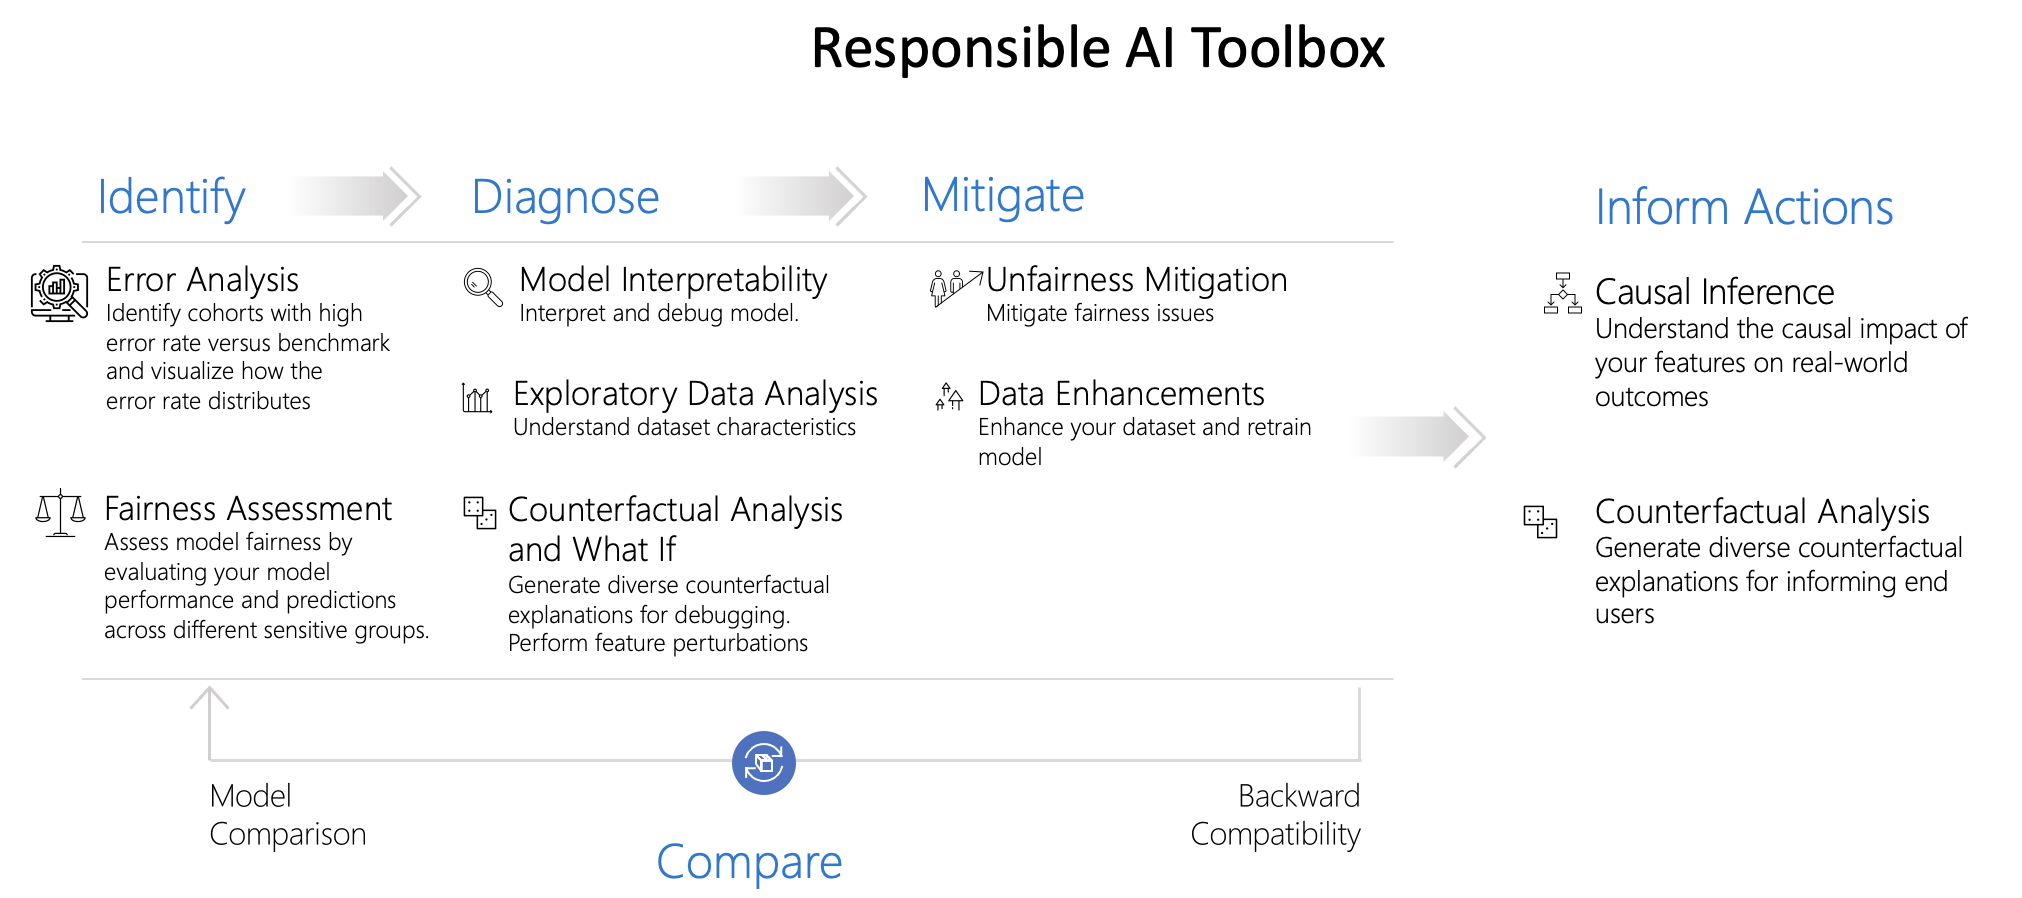 ResponsibleAIToolboxOverview